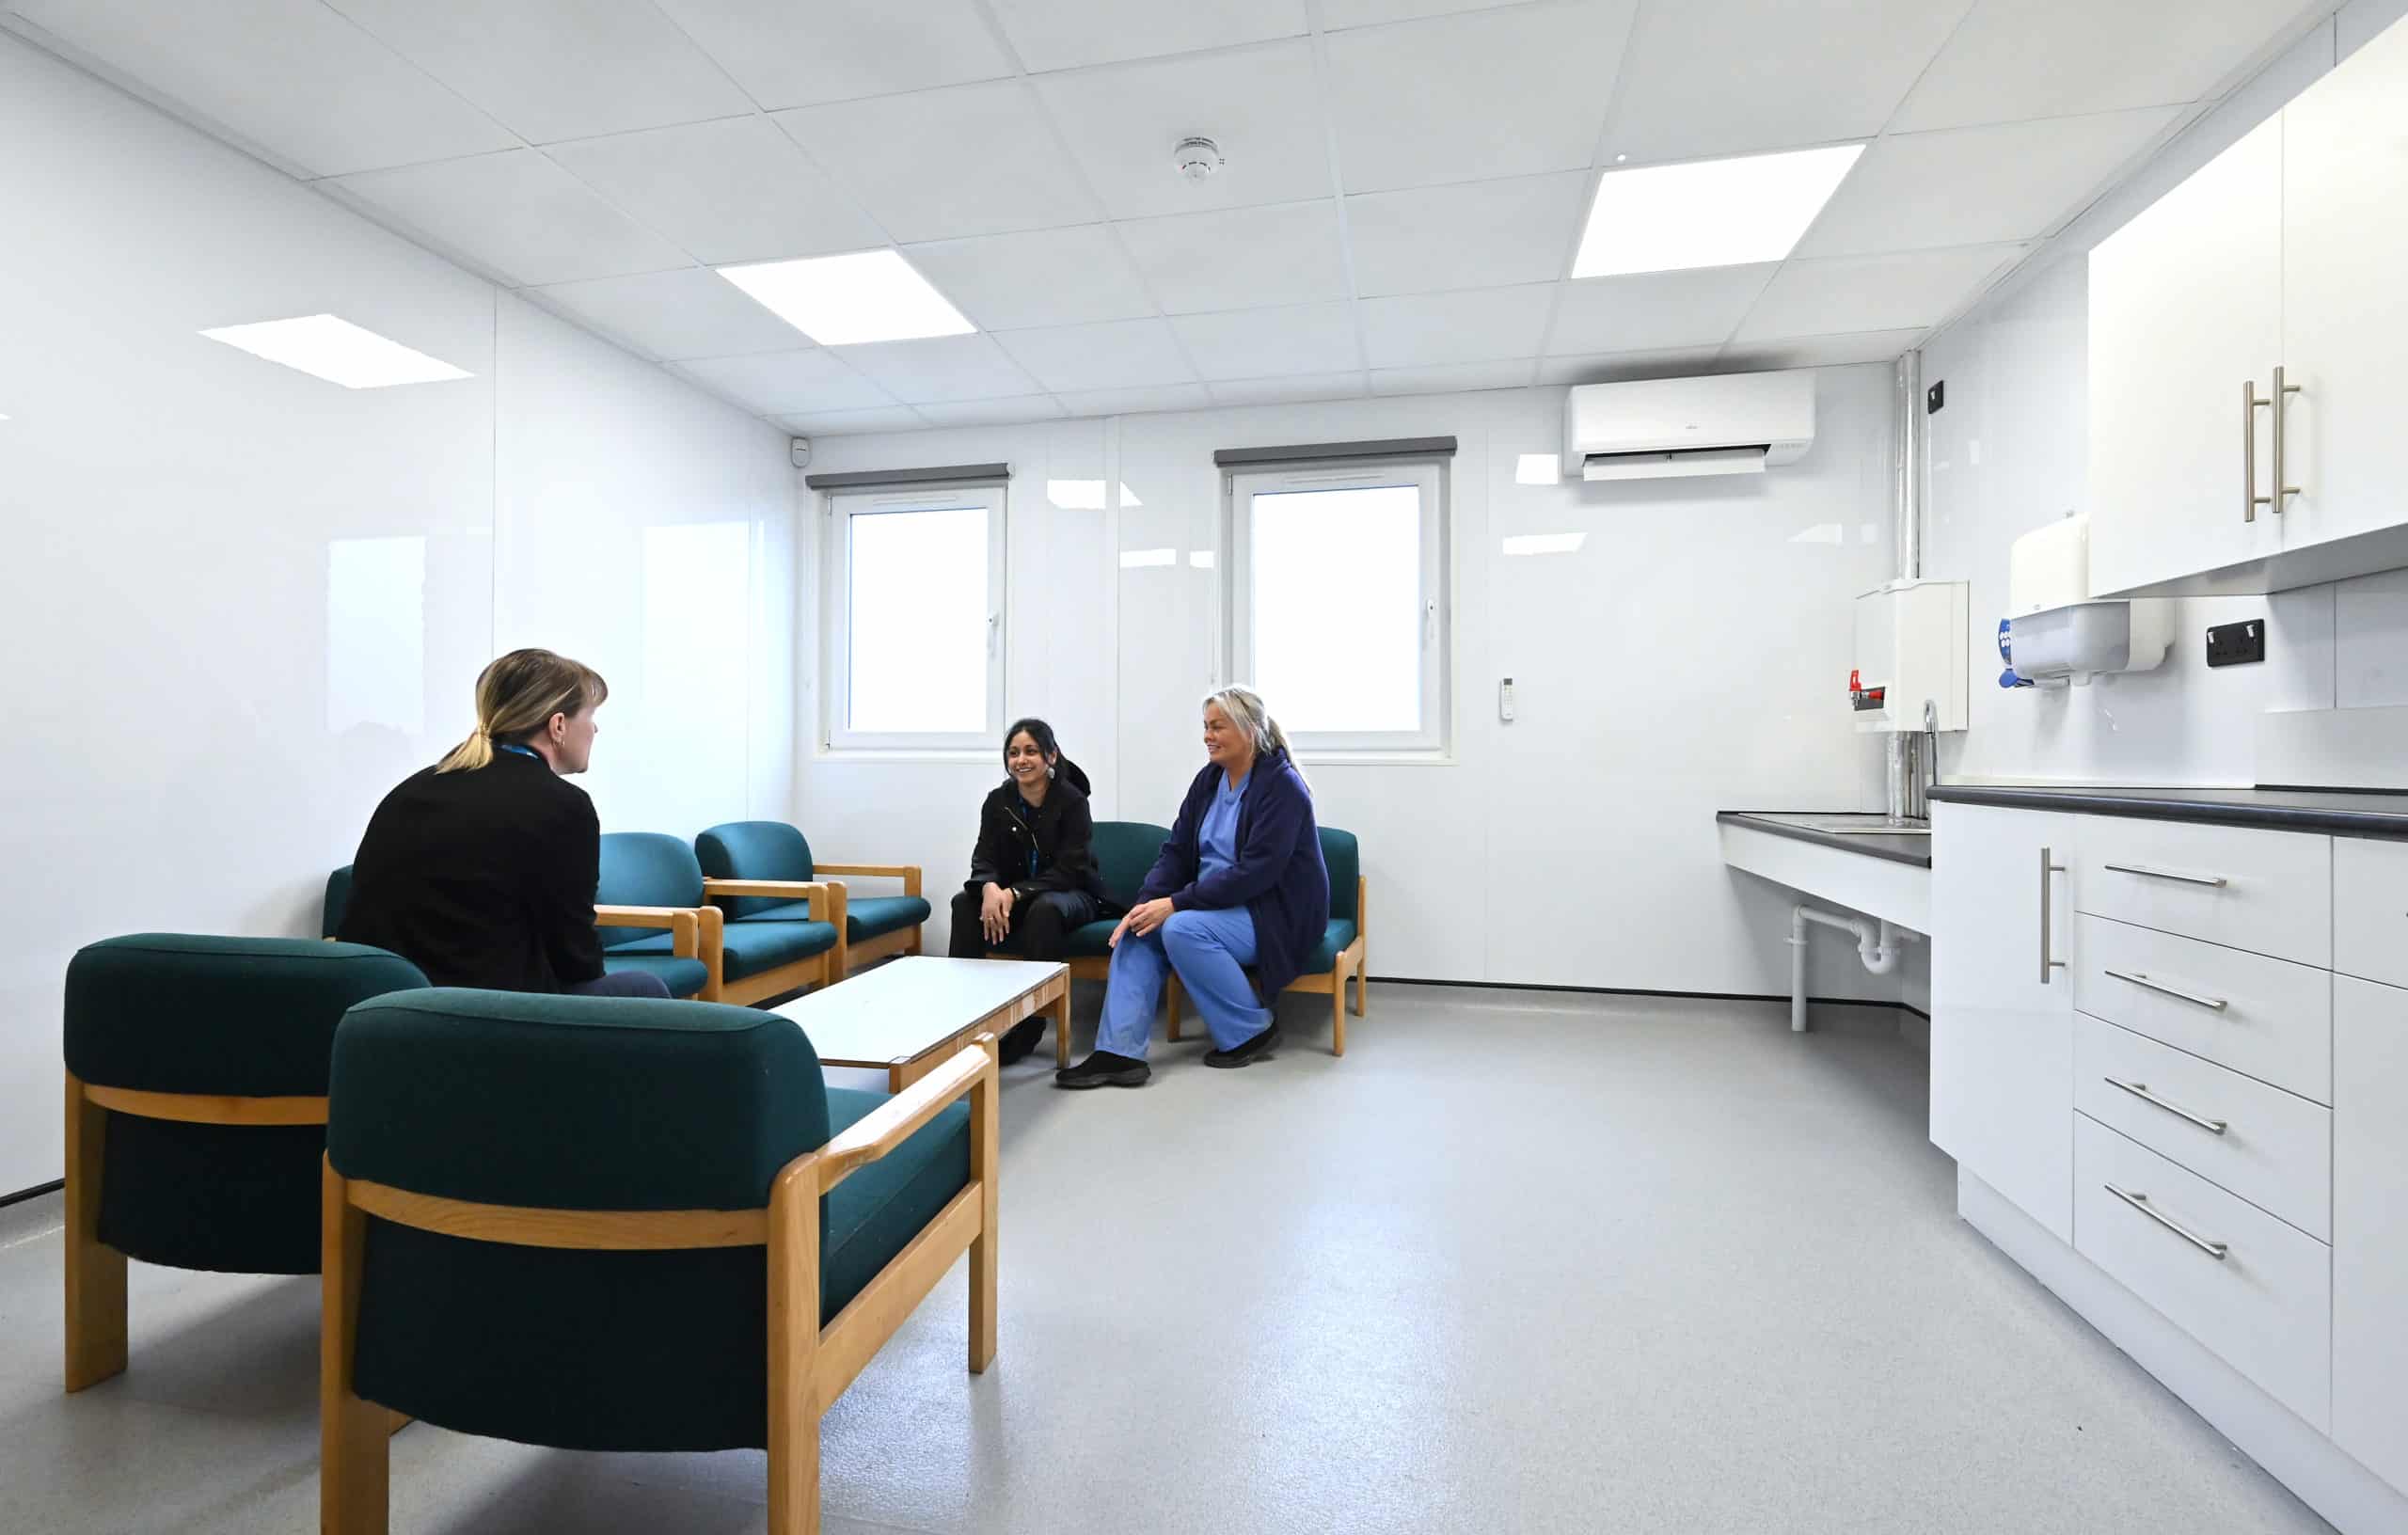 Staff waiting area inside modular hospital. Chairs with a coffee table and a sink and cabinets. 